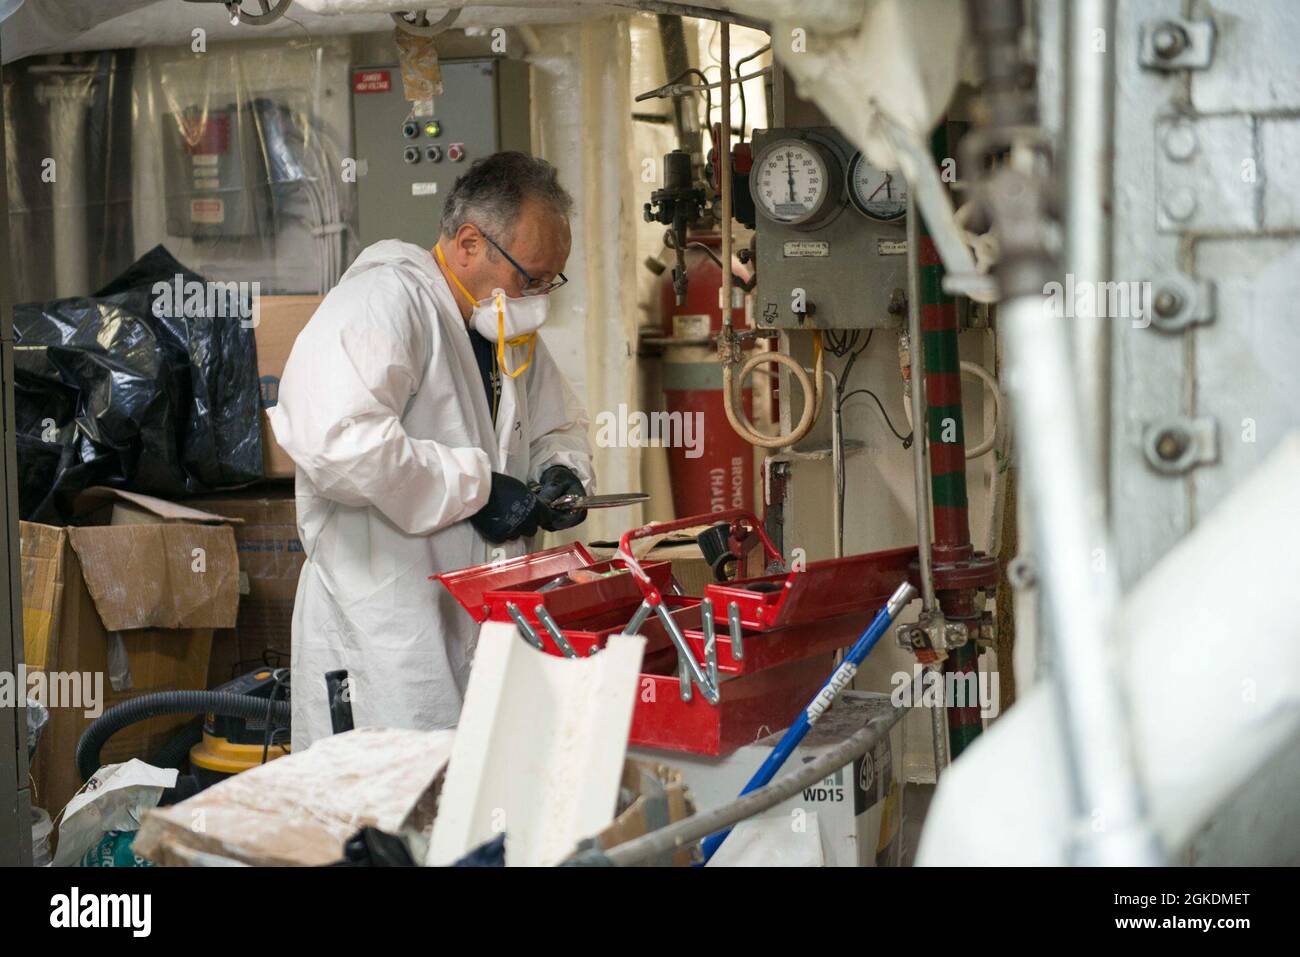 210323-N-EI510-0038 GAETA, Italy (March 23, 2021) An Italian contractor fixes a tool during a repair aboard the Blue Ridge-class command and control ship USS Mount Whitney (LCC 20) in Gaeta, Italy, March 23, 2021. Mount Whitney, forward deployed to Gaeta, Italy operates with a combined crew of Sailors and Military Sealift Command civil service mariners in the U.S. Sixth Fleet area of operations in support of U.S. national security interests in Europe and Africa. Stock Photo